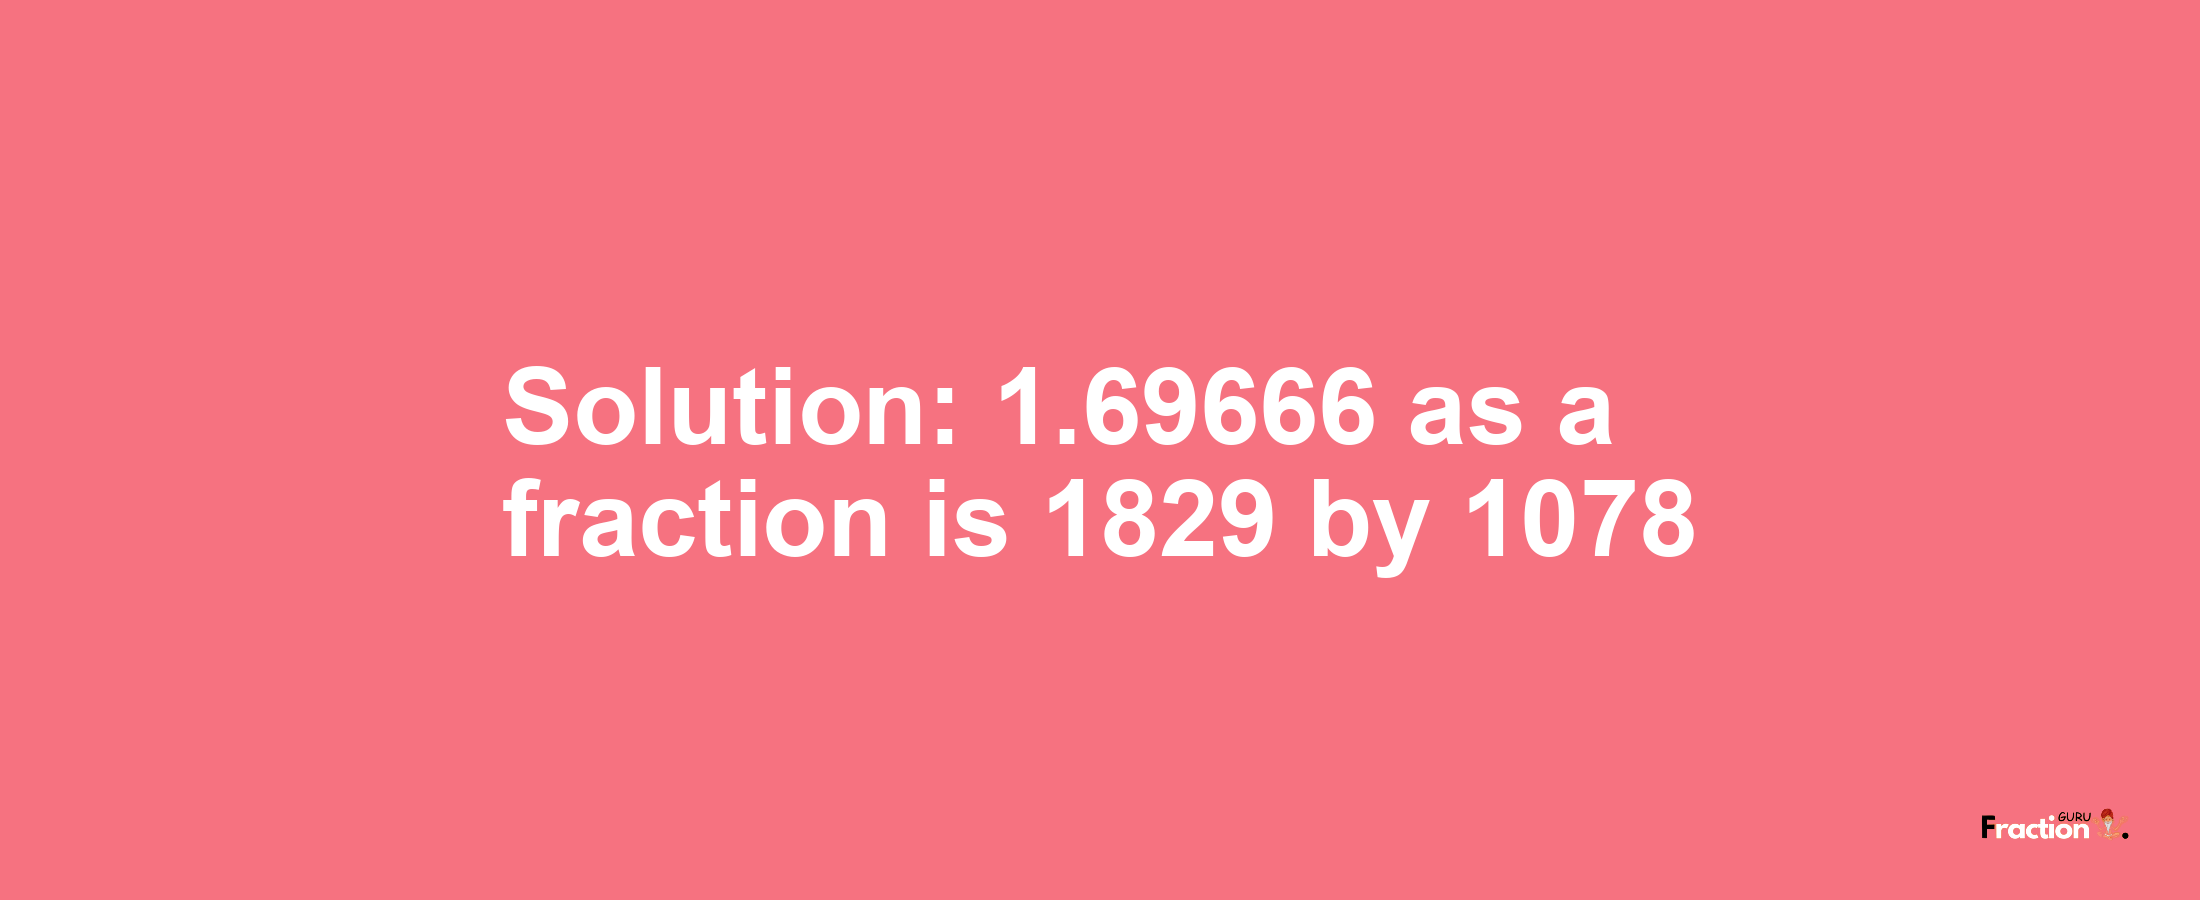 Solution:1.69666 as a fraction is 1829/1078